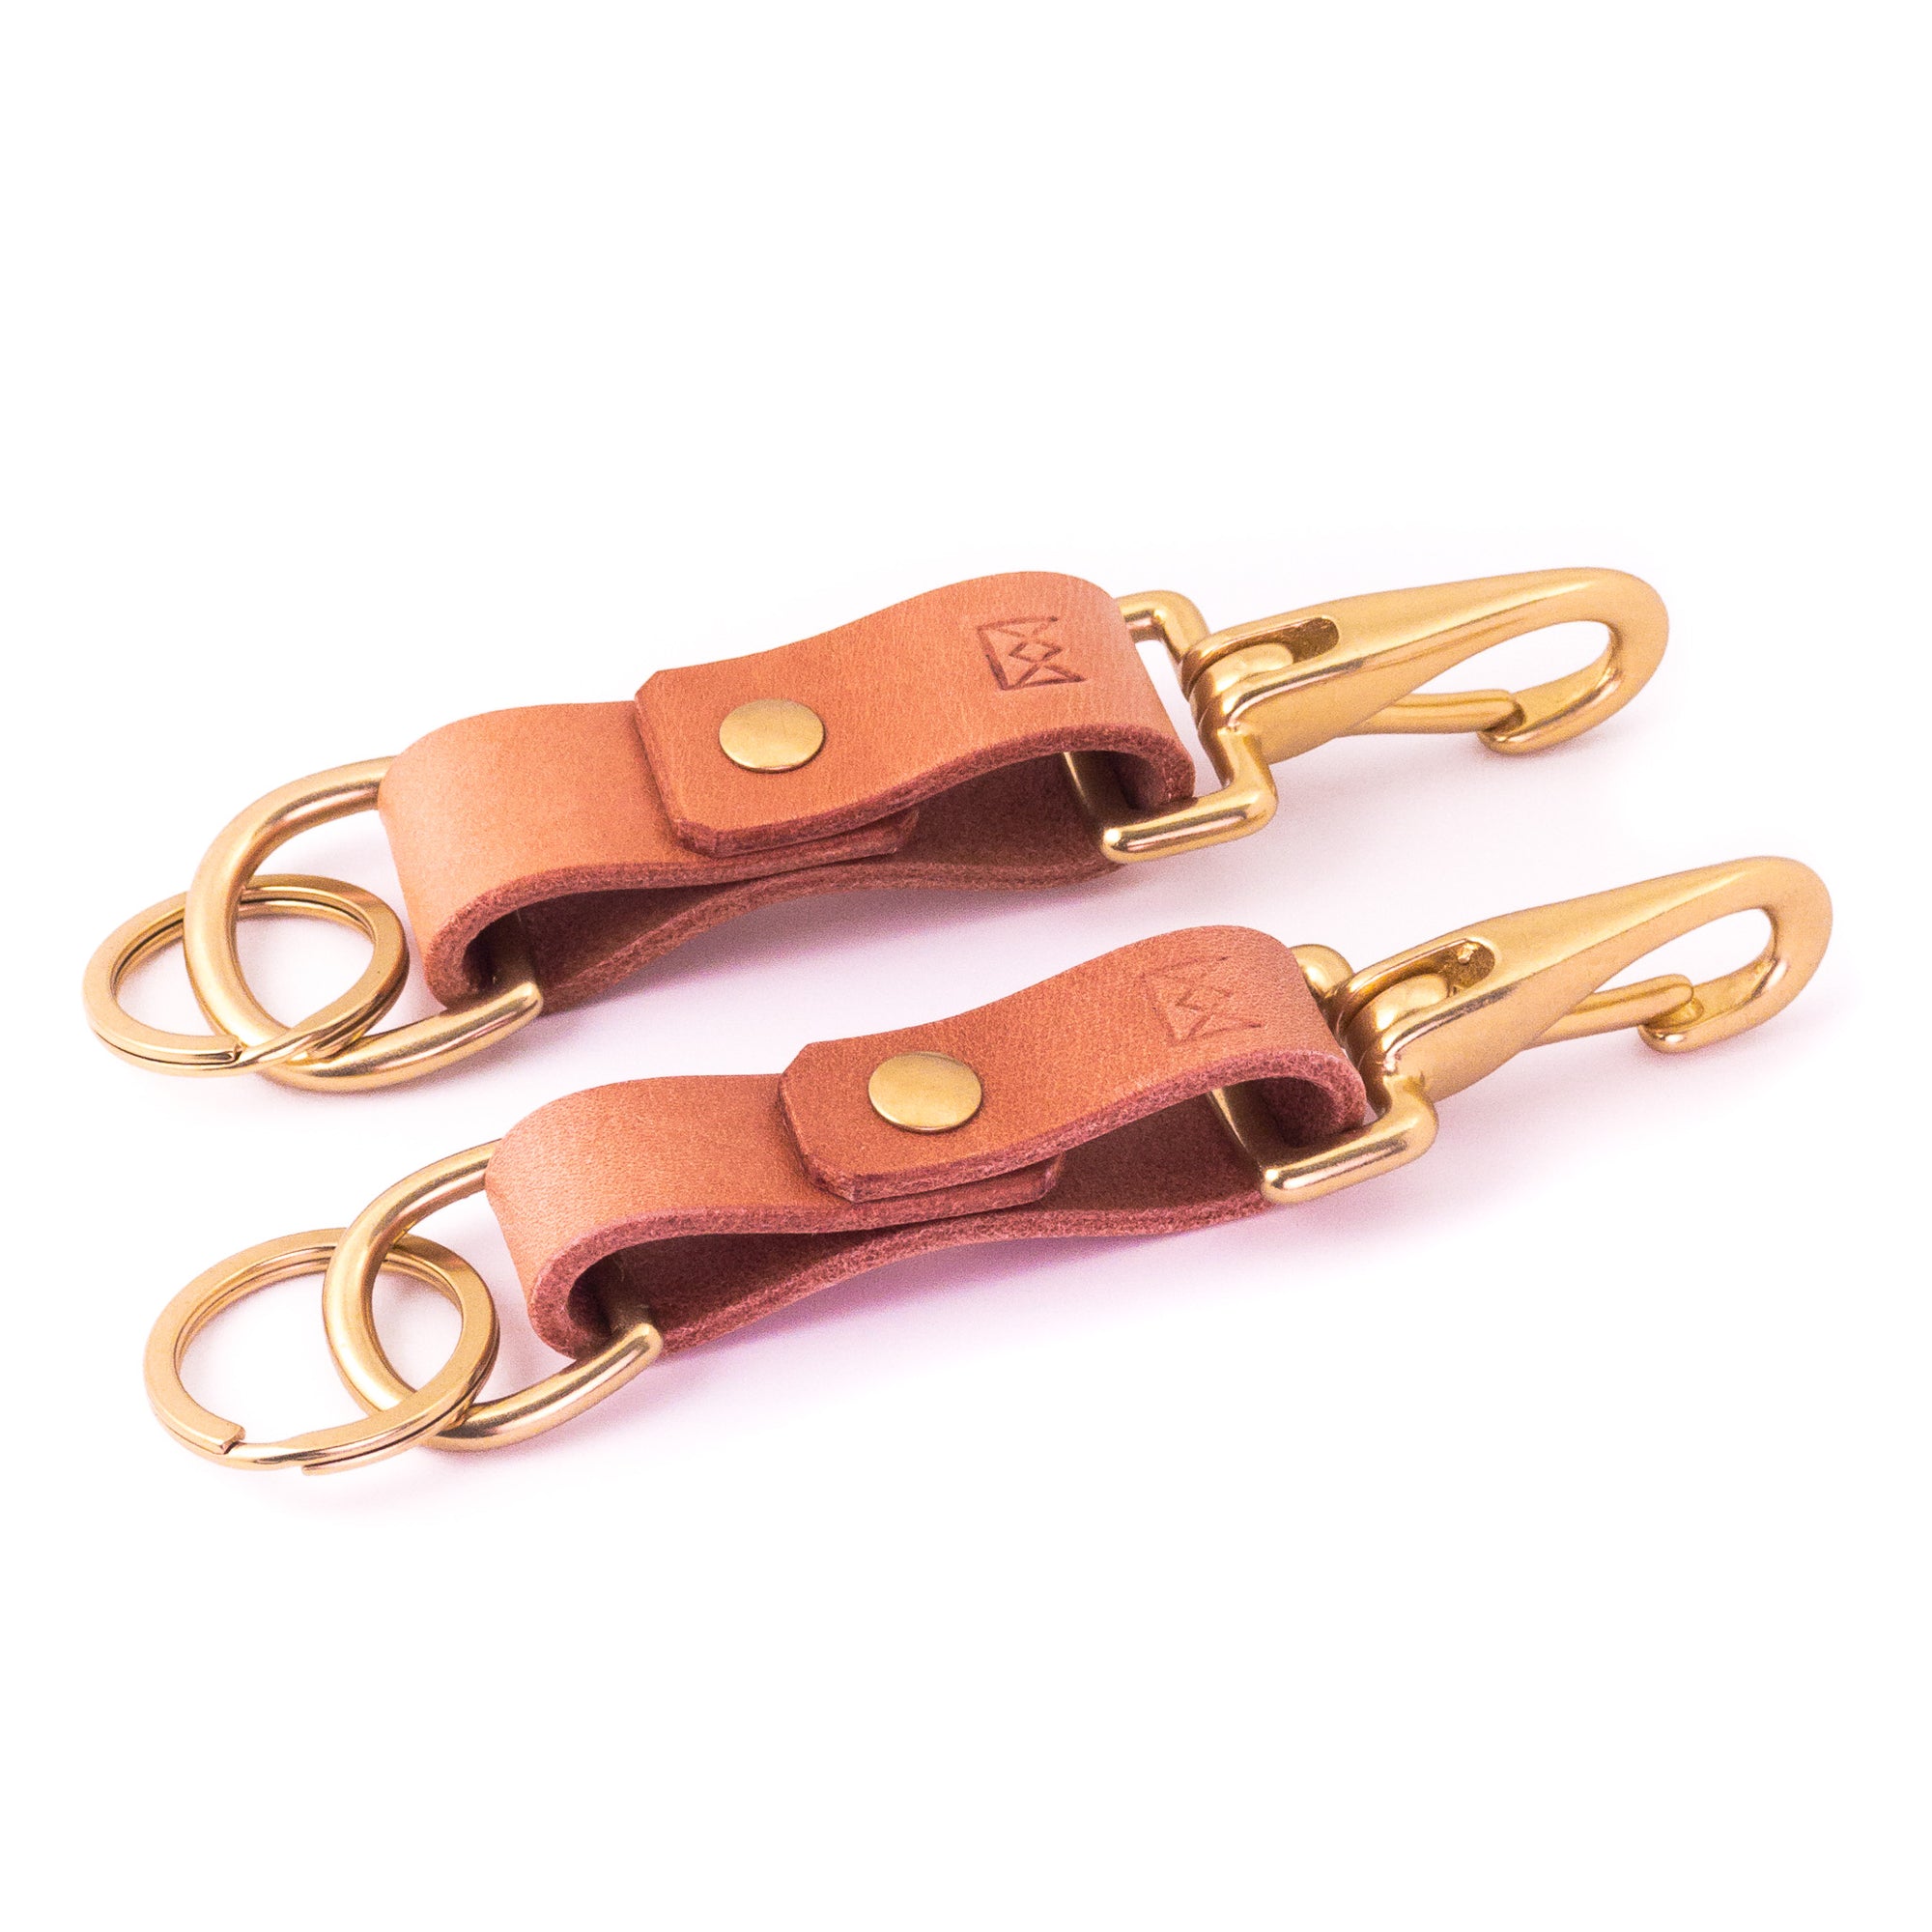 Kingston Barn Harness Leather Keychain in Natural with Solid-Brass Equestrian Halter Snap